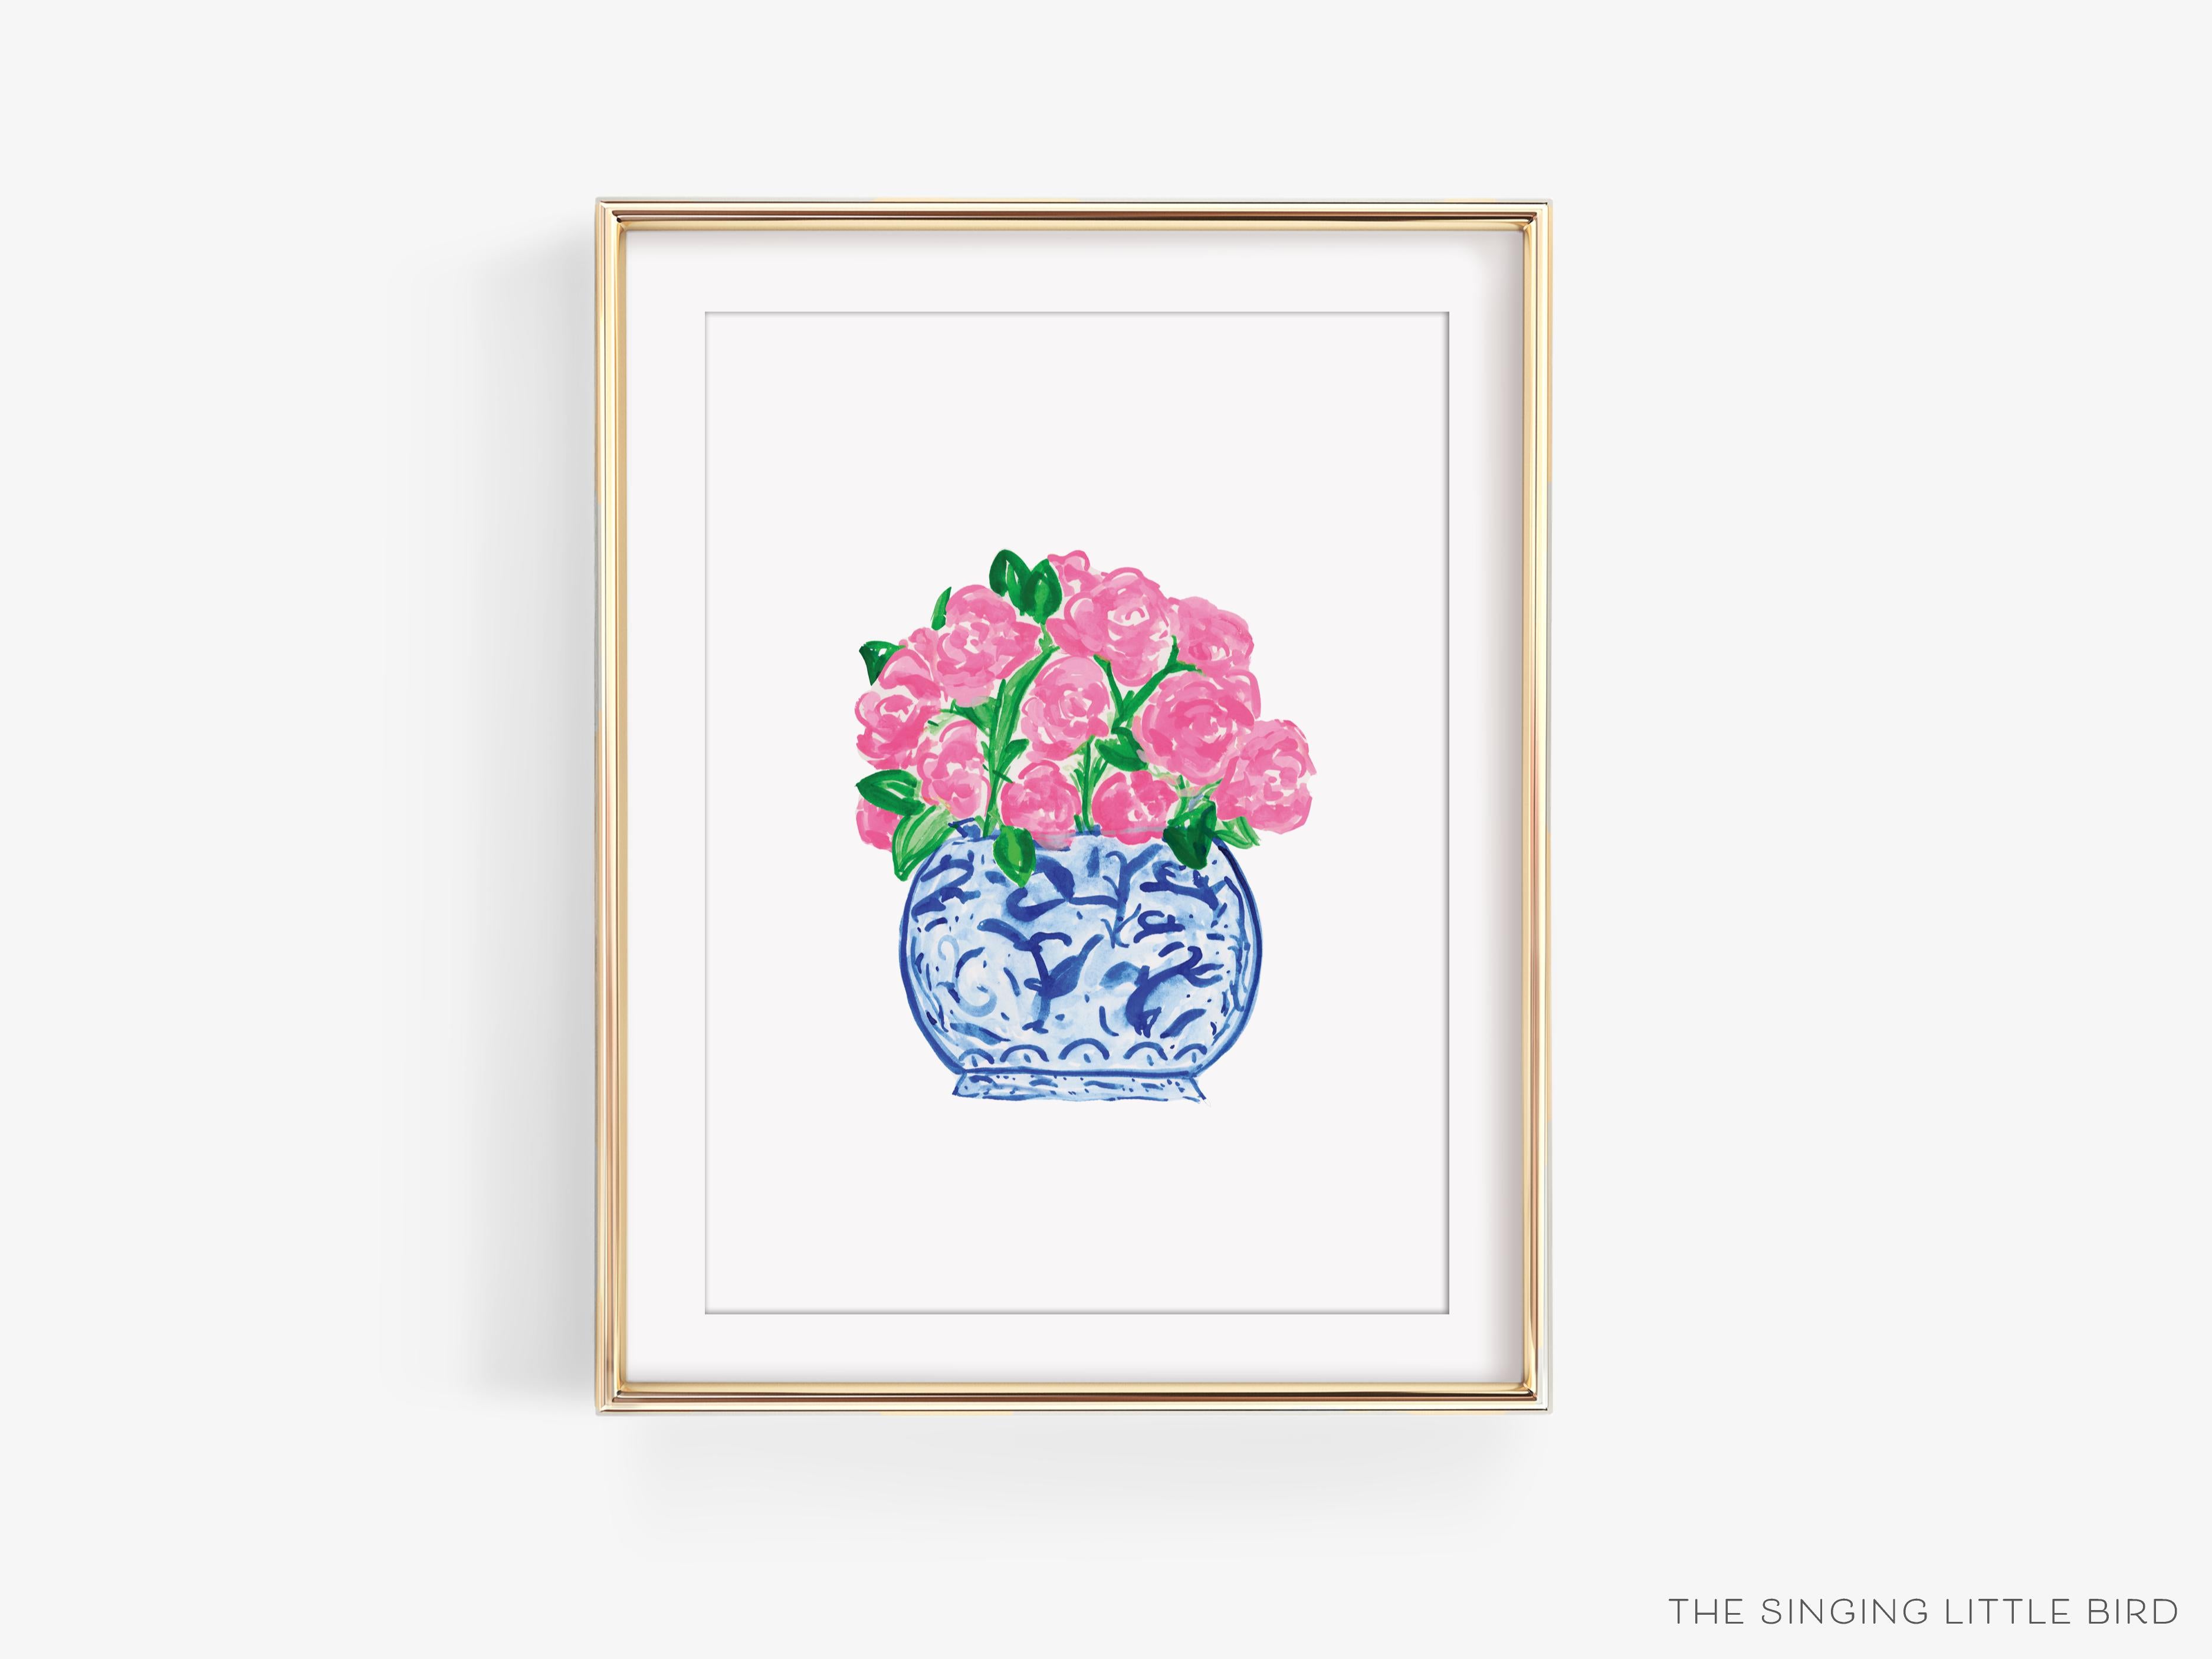 Pink Peonies in Ginger Jar Art Print-This watercolor art print features our hand-painted Peonies and a Ginger Jar, printed in the USA on 120lb high quality art paper. This makes a great gift or wall decor for the flower and chinoiserie lover in your life.-The Singing Little Bird